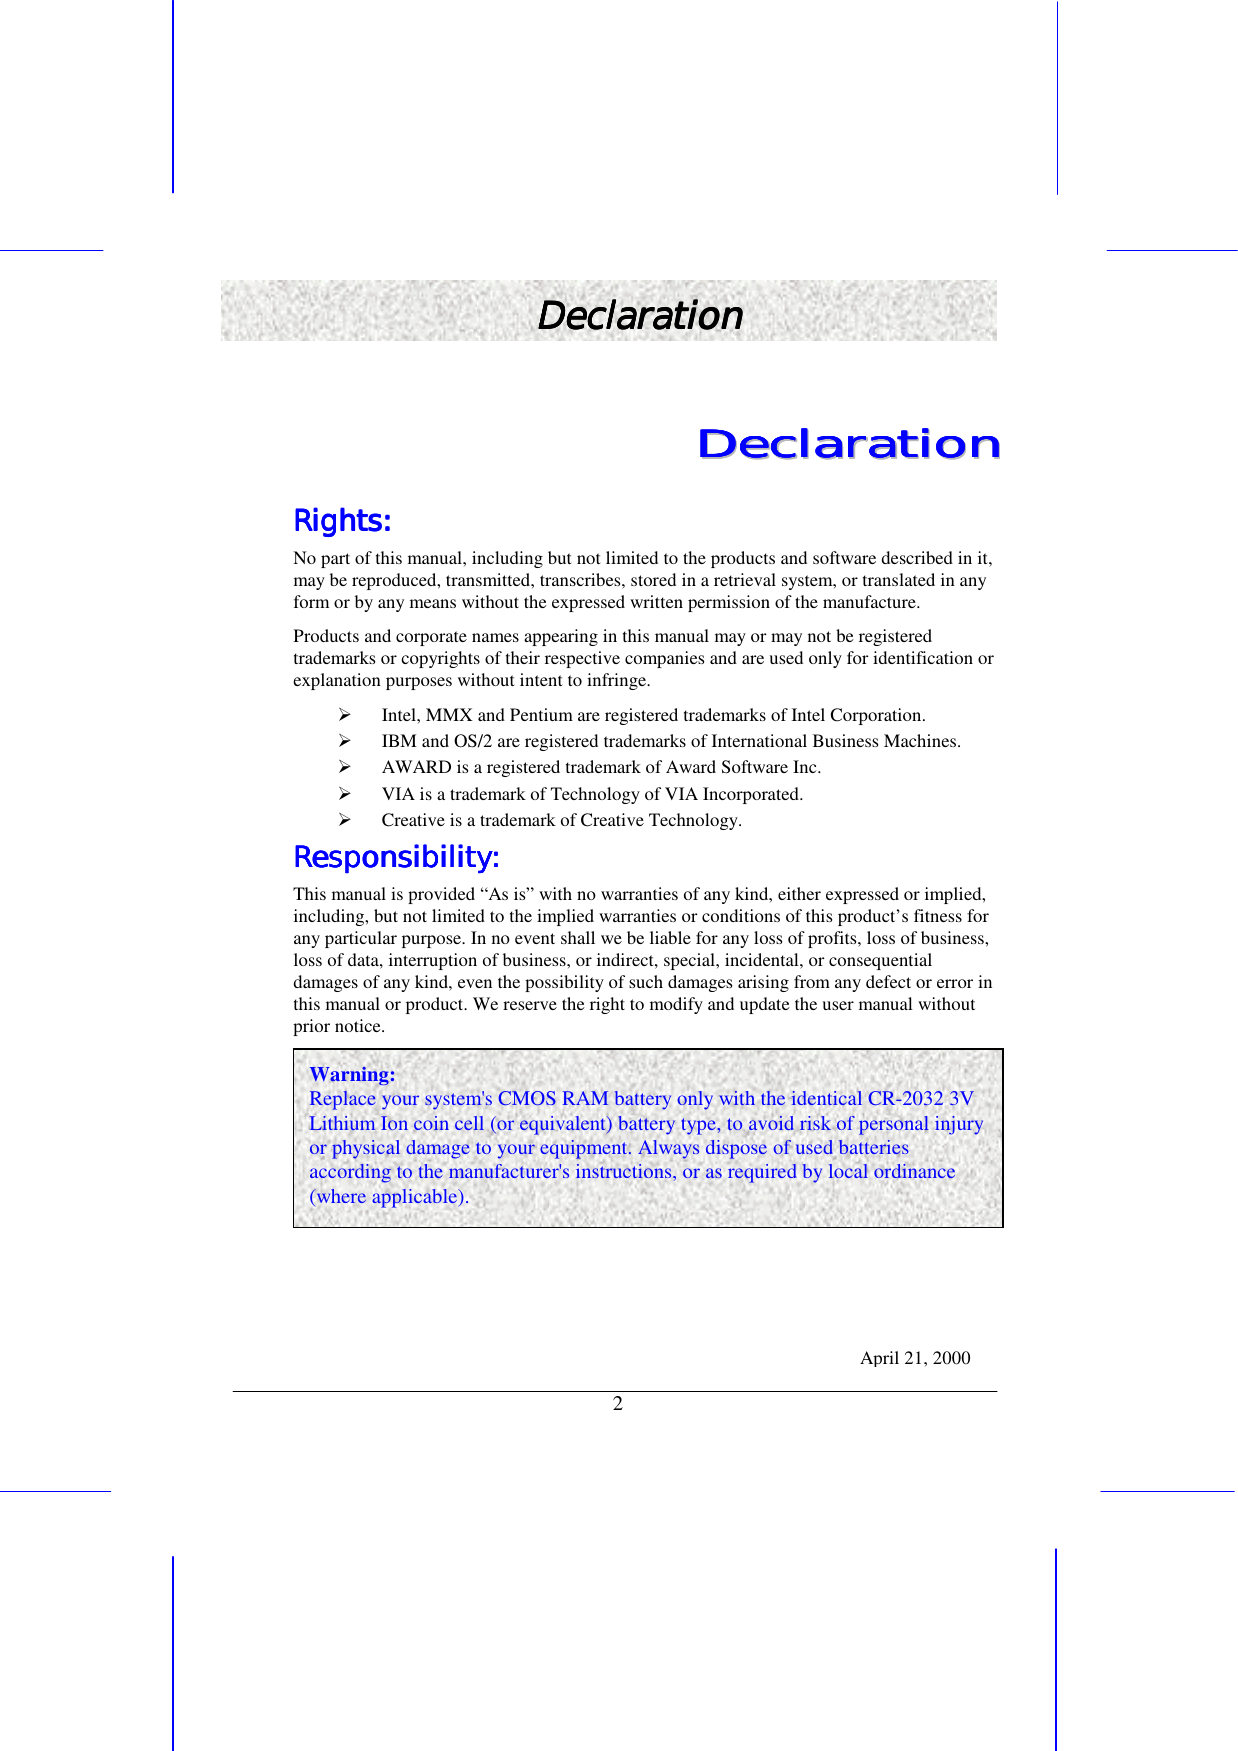   2 DeclarationDeclarationDeclarationDeclaration    DDDDDDDDeeeeeeeeccccccccllllllllaaaaaaaarrrrrrrraaaaaaaattttttttiiiiiiiioooooooonnnnnnnn        Rights:Rights:Rights:Rights:    No part of this manual, including but not limited to the products and software described in it, may be reproduced, transmitted, transcribes, stored in a retrieval system, or translated in any form or by any means without the expressed written permission of the manufacture. Products and corporate names appearing in this manual may or may not be registered trademarks or copyrights of their respective companies and are used only for identification or explanation purposes without intent to infringe. !&quot; Intel, MMX and Pentium are registered trademarks of Intel Corporation. !&quot; IBM and OS/2 are registered trademarks of International Business Machines. !&quot; AWARD is a registered trademark of Award Software Inc. !&quot; VIA is a trademark of Technology of VIA Incorporated. !&quot; Creative is a trademark of Creative Technology. Responsibility:   Responsibility:   Responsibility:   Responsibility:       This manual is provided “As is” with no warranties of any kind, either expressed or implied, including, but not limited to the implied warranties or conditions of this product’s fitness for any particular purpose. In no event shall we be liable for any loss of profits, loss of business, loss of data, interruption of business, or indirect, special, incidental, or consequential damages of any kind, even the possibility of such damages arising from any defect or error in this manual or product. We reserve the right to modify and update the user manual without prior notice. April 21, 2000 Warning: Replace your system&apos;s CMOS RAM battery only with the identical CR-2032 3V Lithium Ion coin cell (or equivalent) battery type, to avoid risk of personal injury or physical damage to your equipment. Always dispose of used batteries according to the manufacturer&apos;s instructions, or as required by local ordinance (where applicable). 